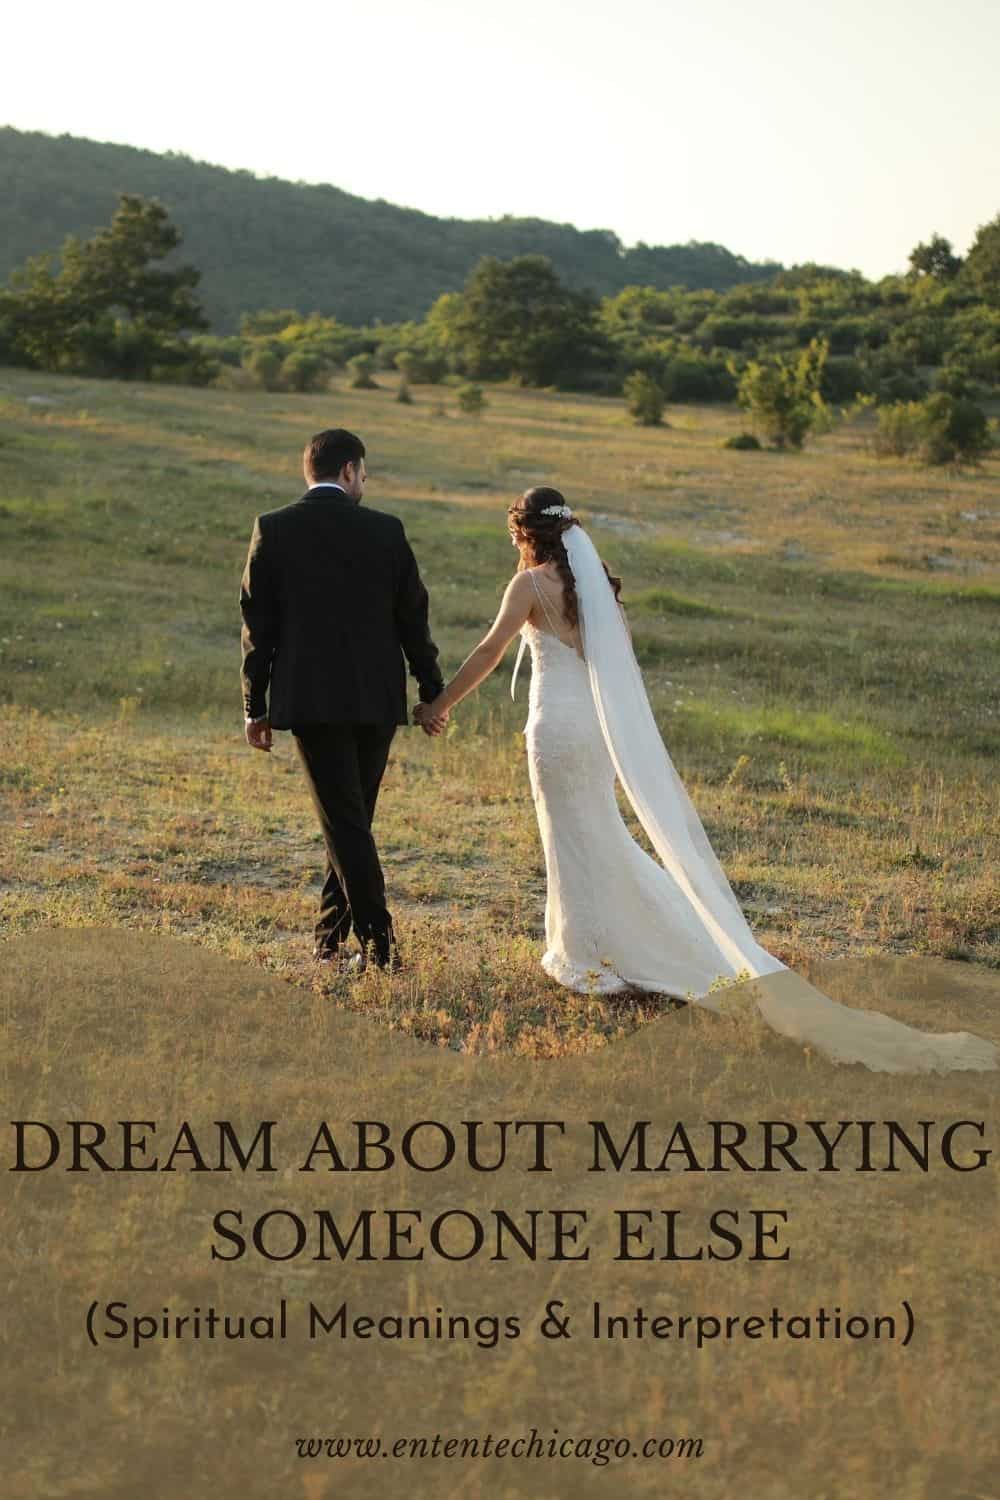 What Does Dreaming Of Marrying Someone Else Mean